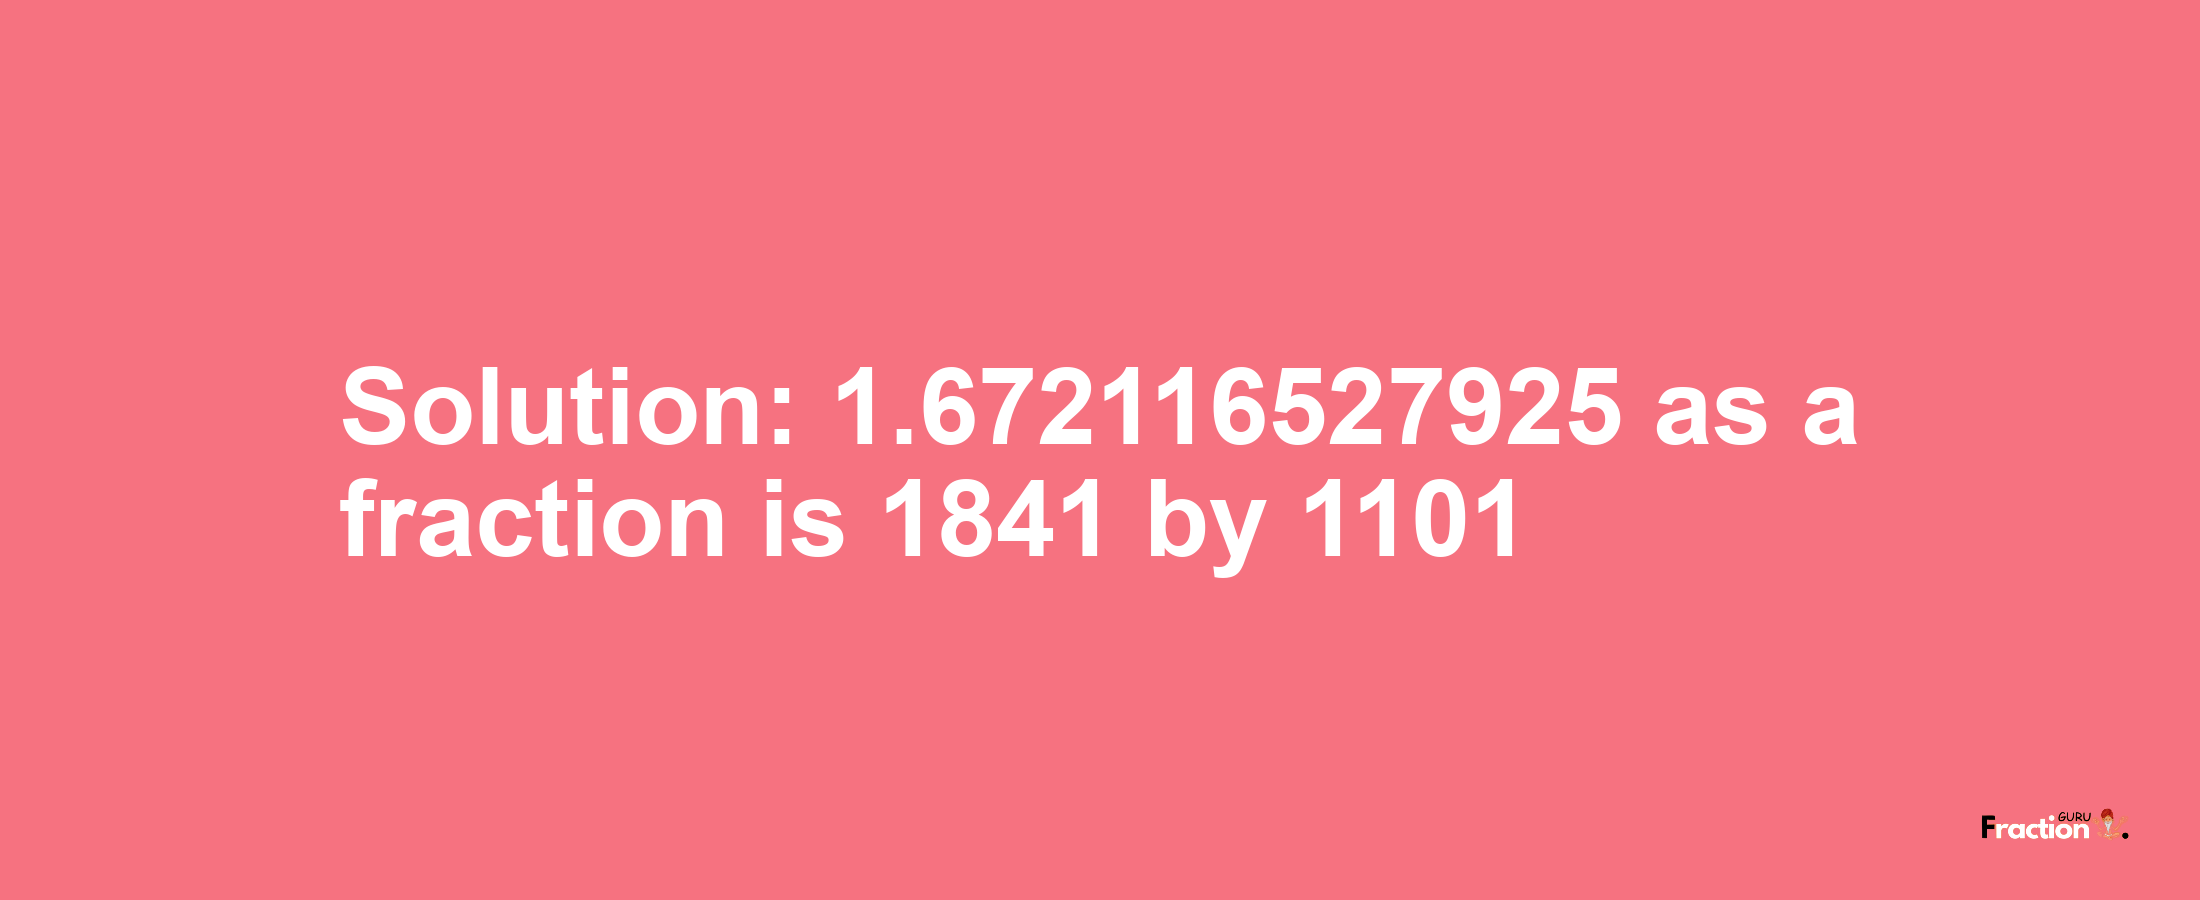 Solution:1.672116527925 as a fraction is 1841/1101